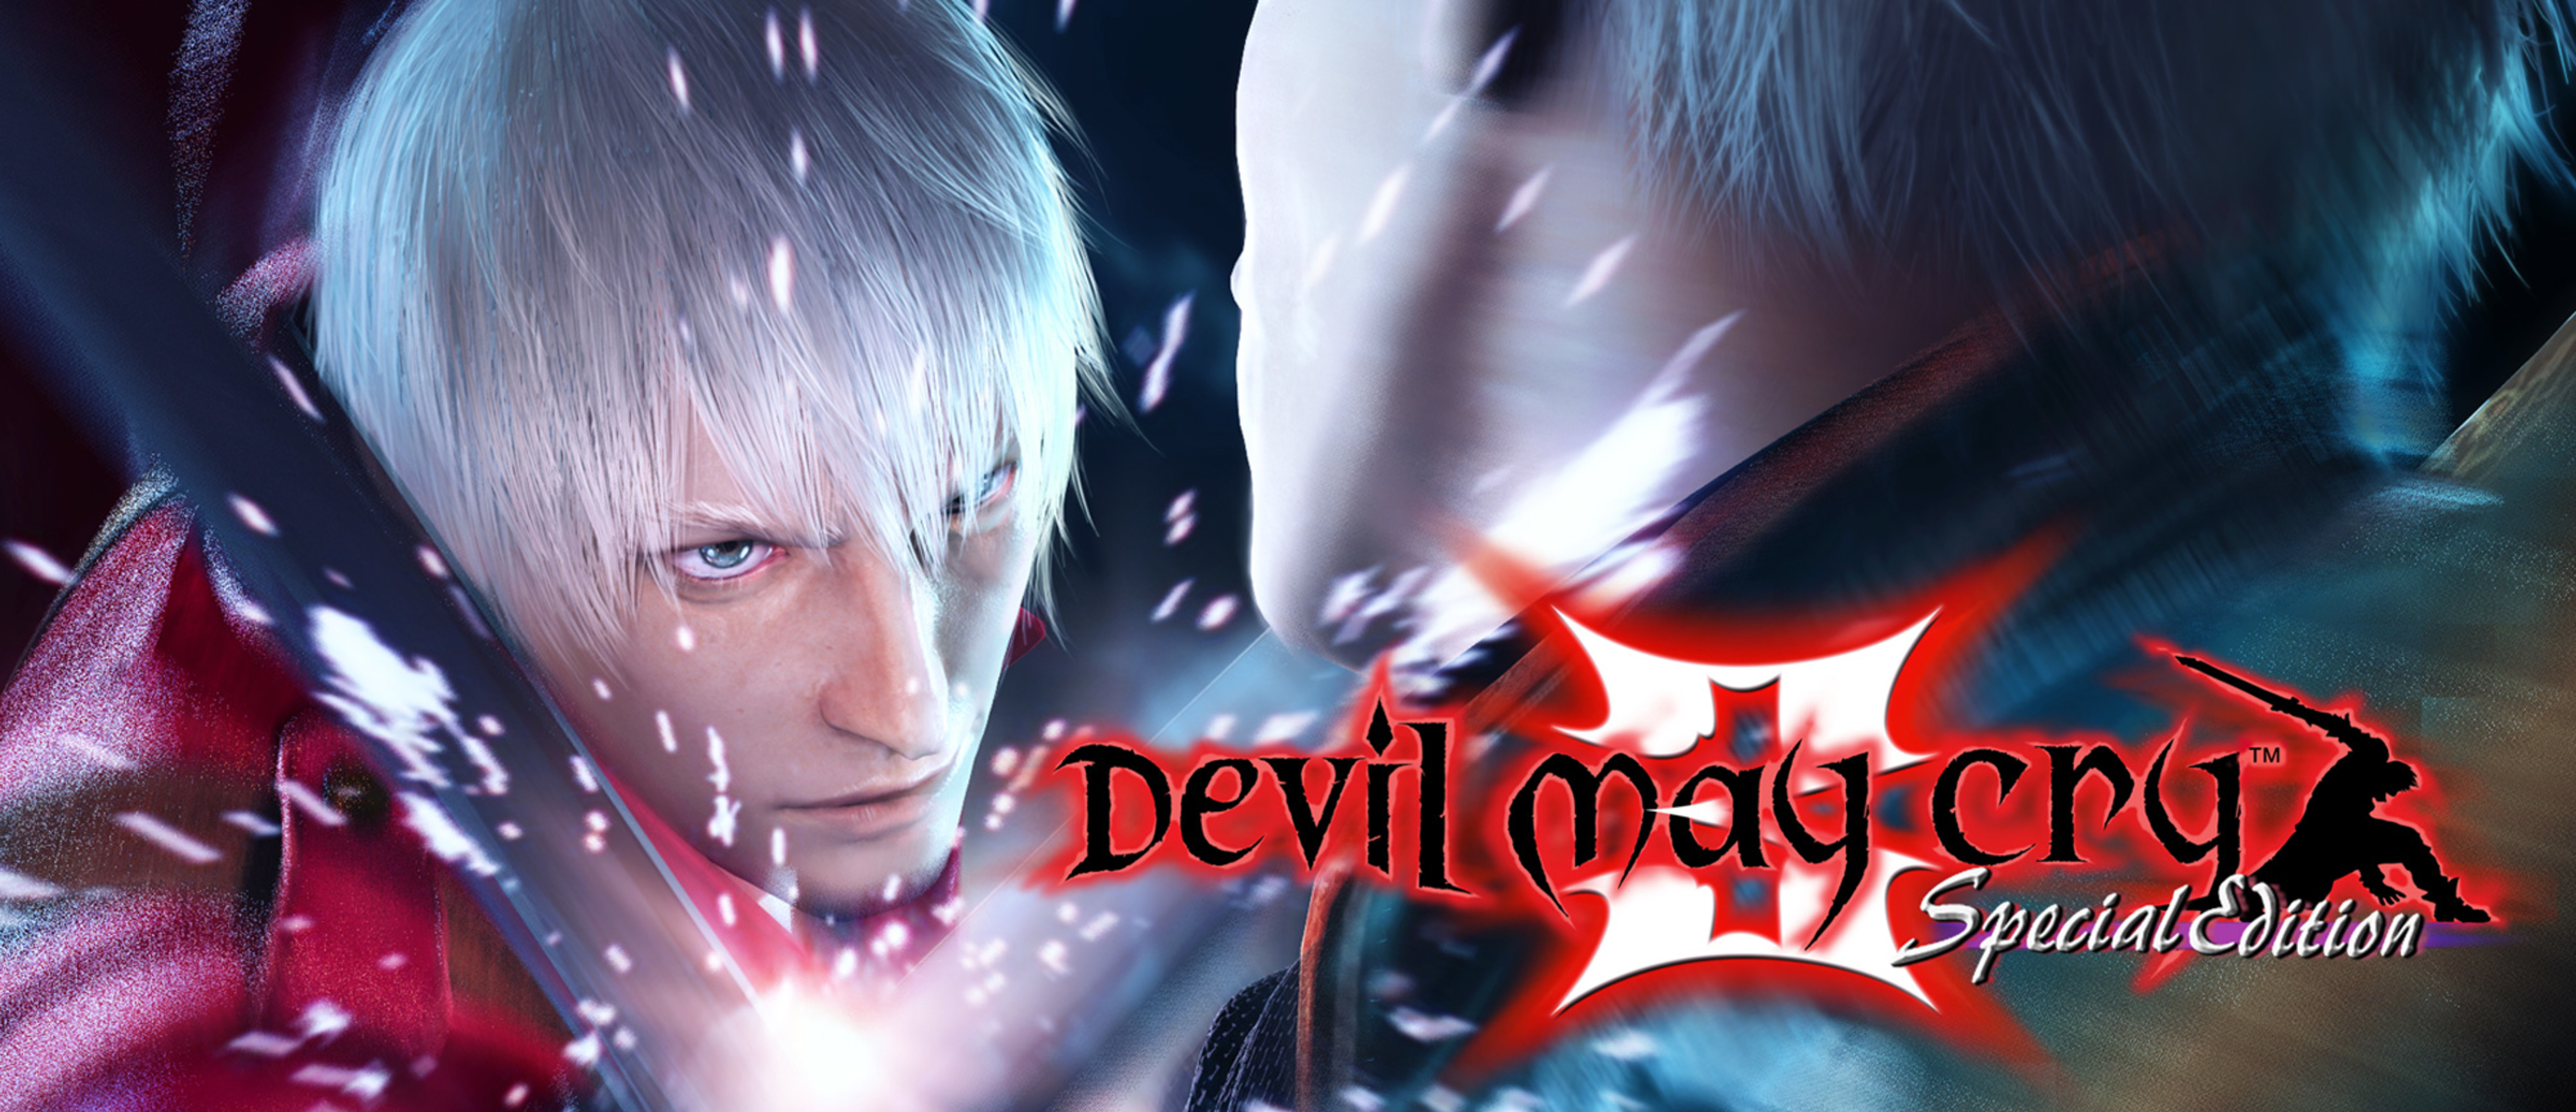 Devil may cry 3 steam not found фото 27